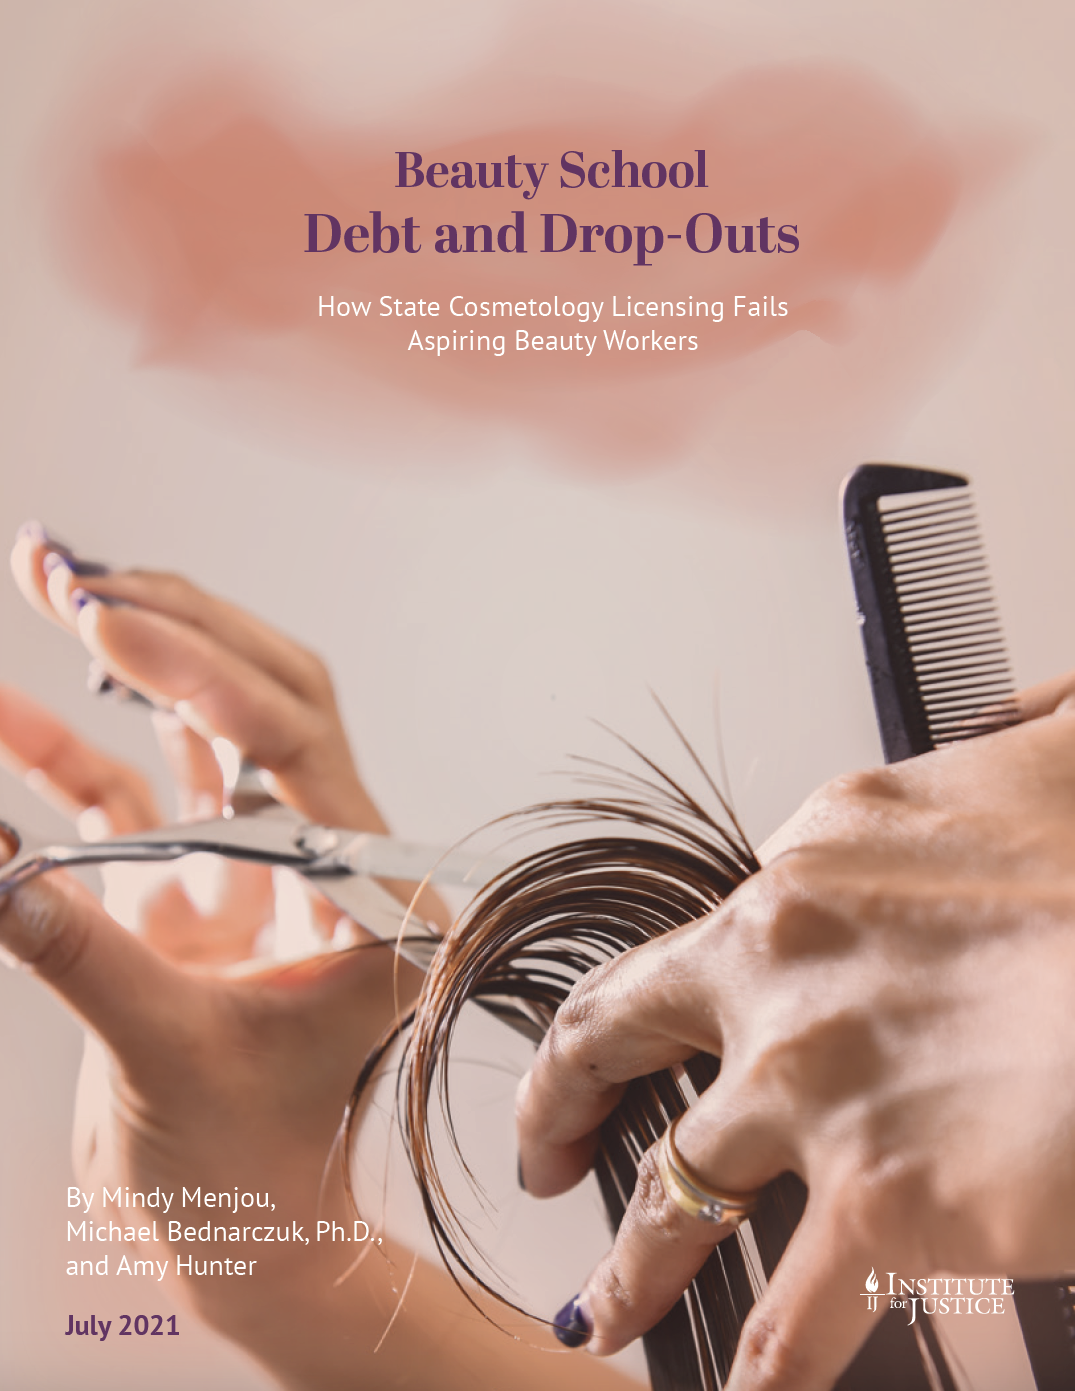 Beauty School Debt and Drop-Outs - Institute for Justice